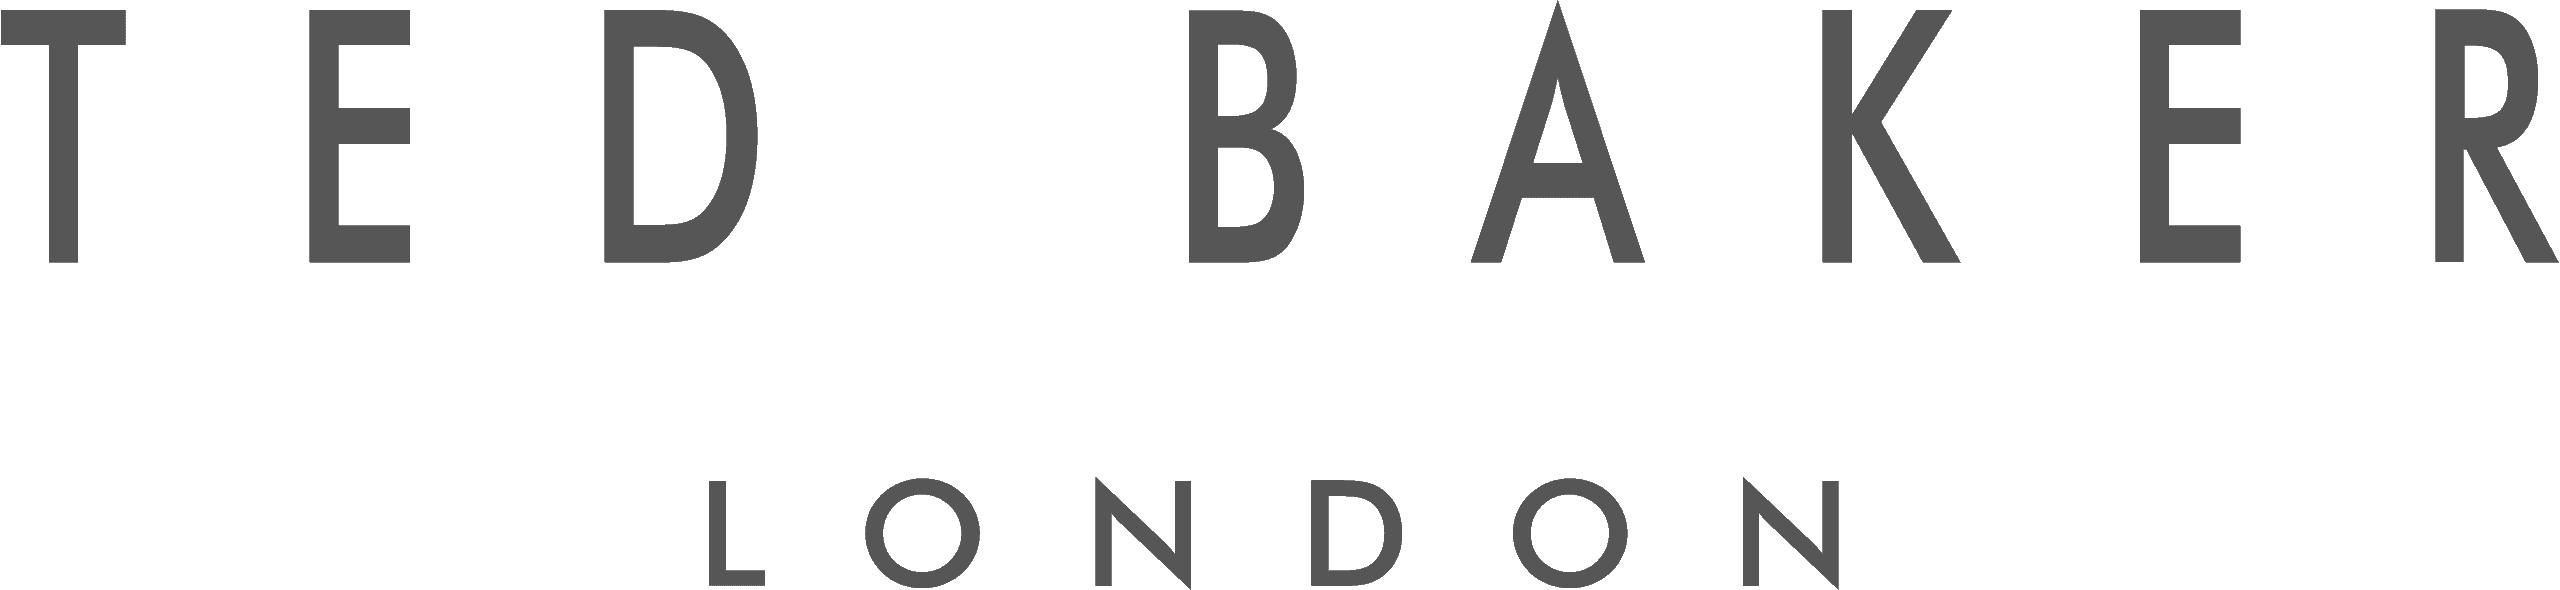 Ted Baker London Student Discount Code Logo